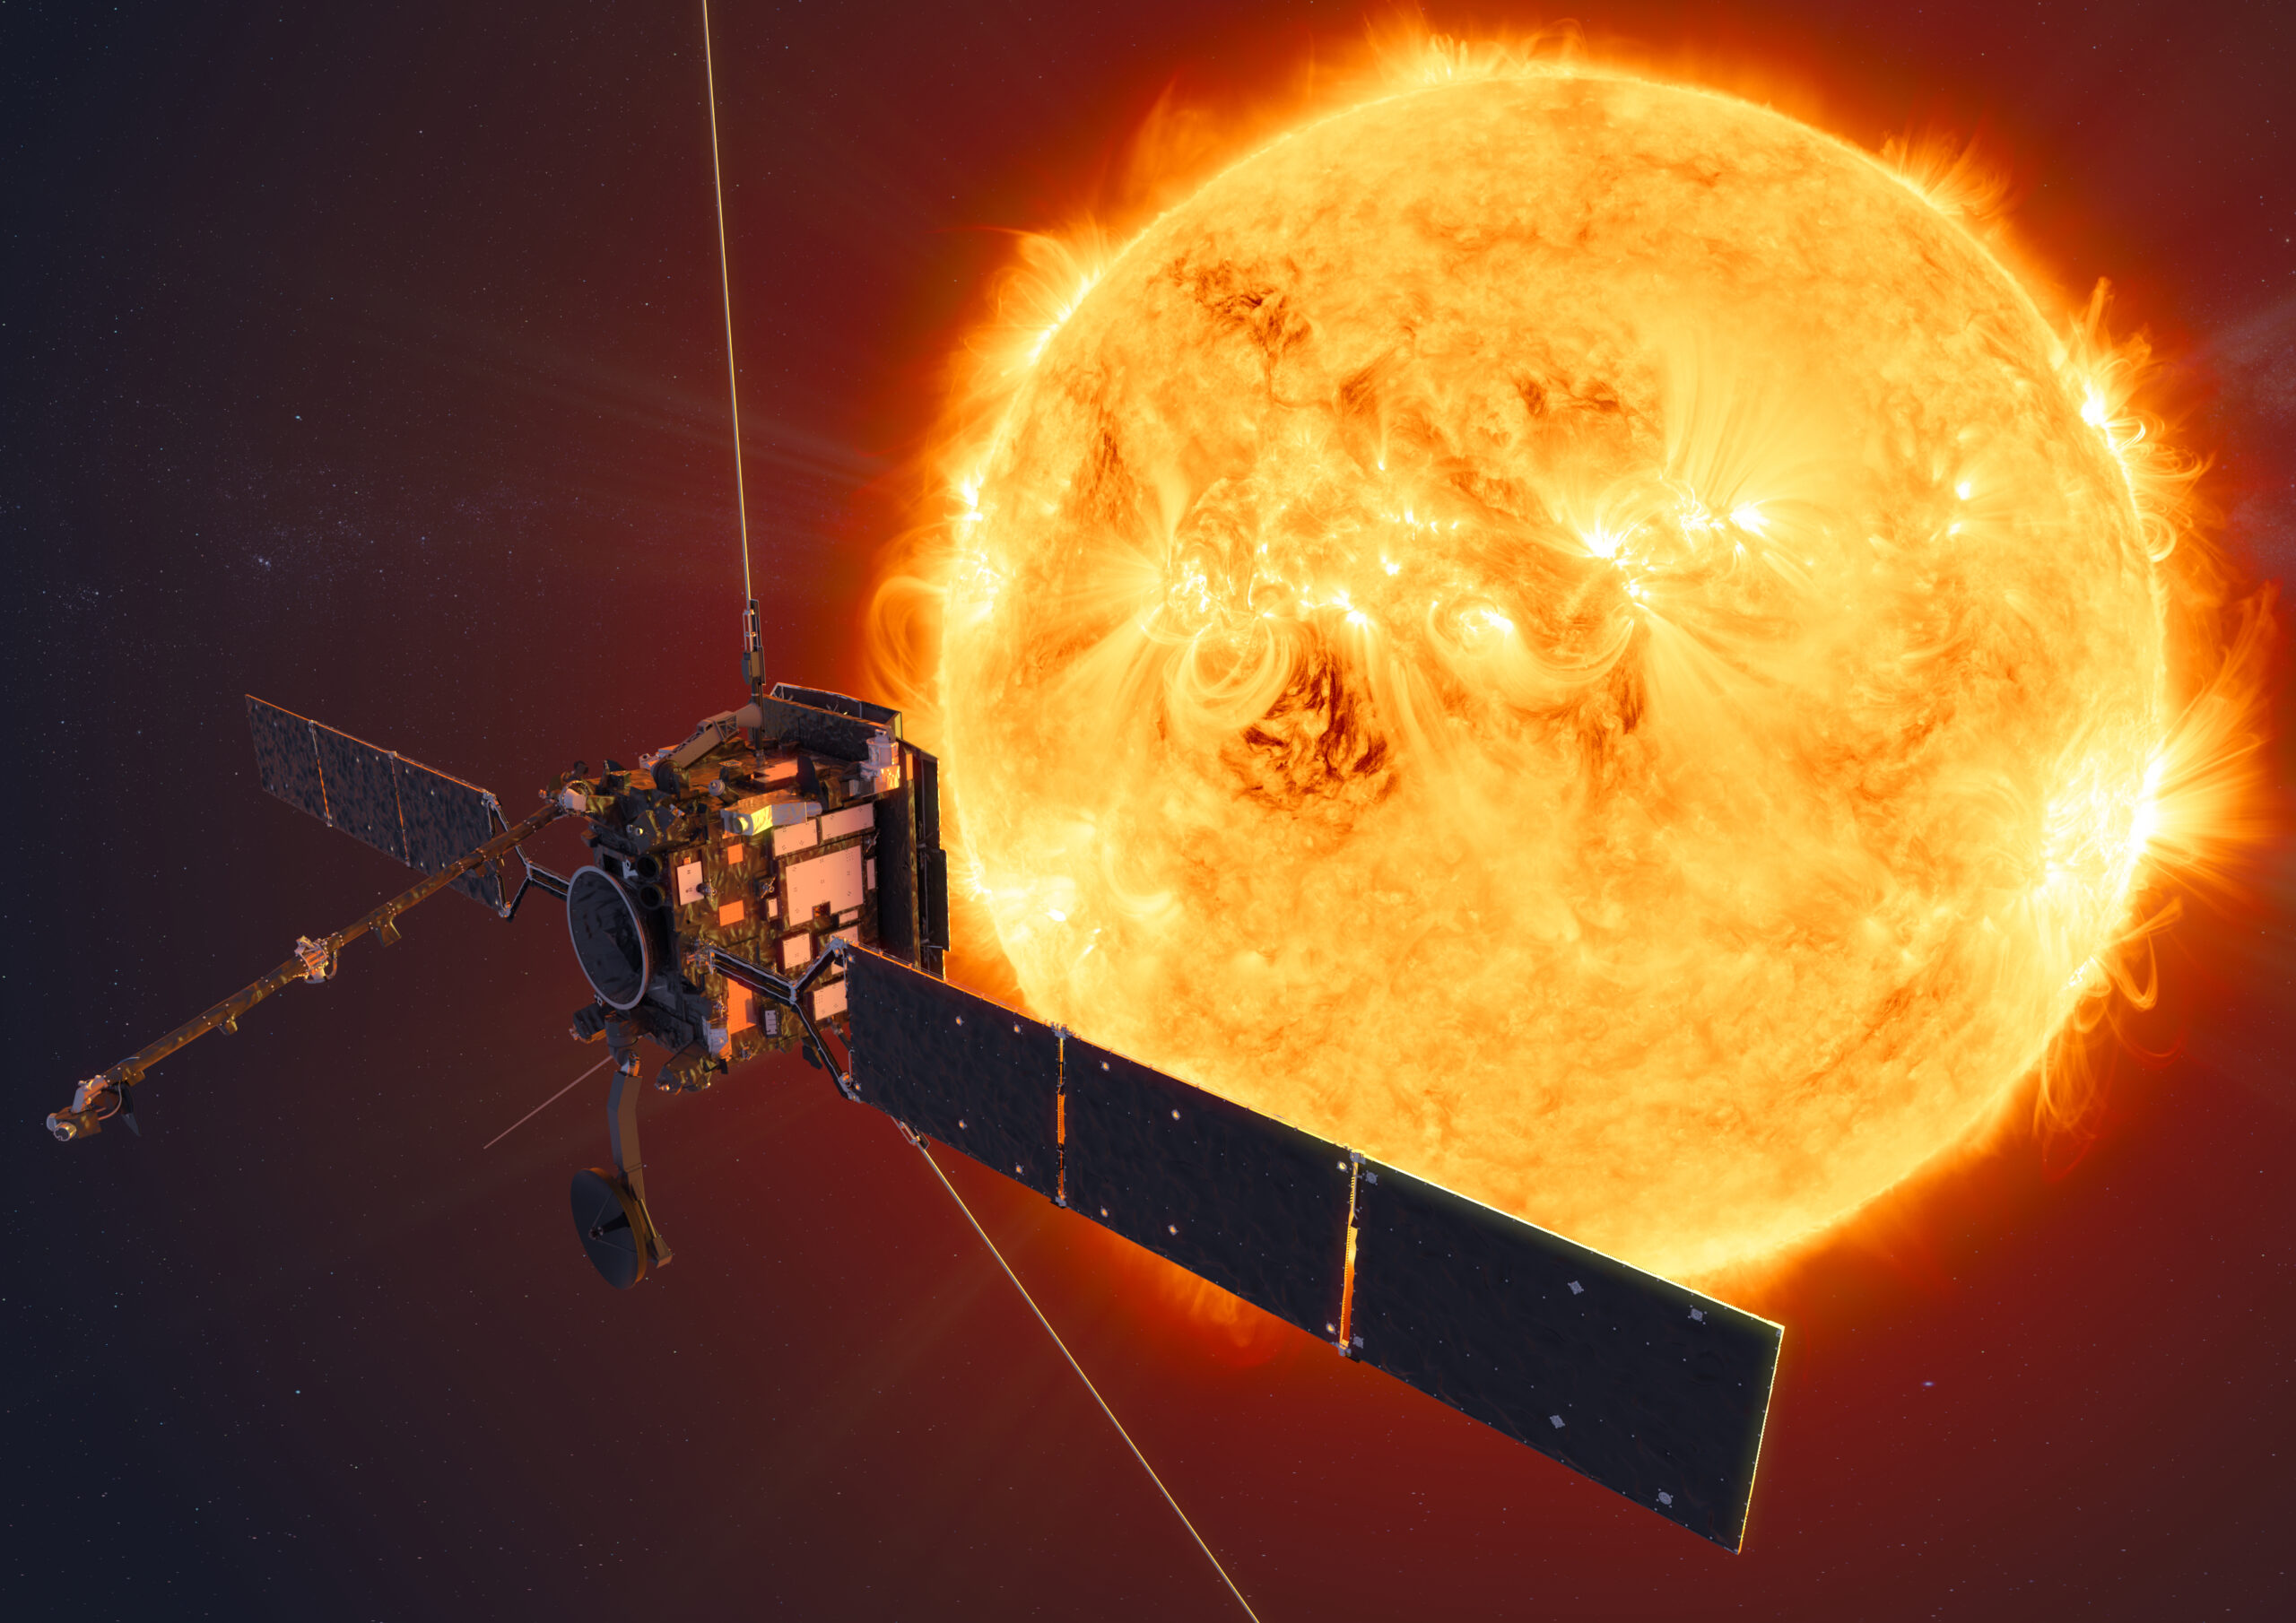 Oude man Corrupt per ongeluk This new solar orbiter will peek at some of the sun's most secretive spots